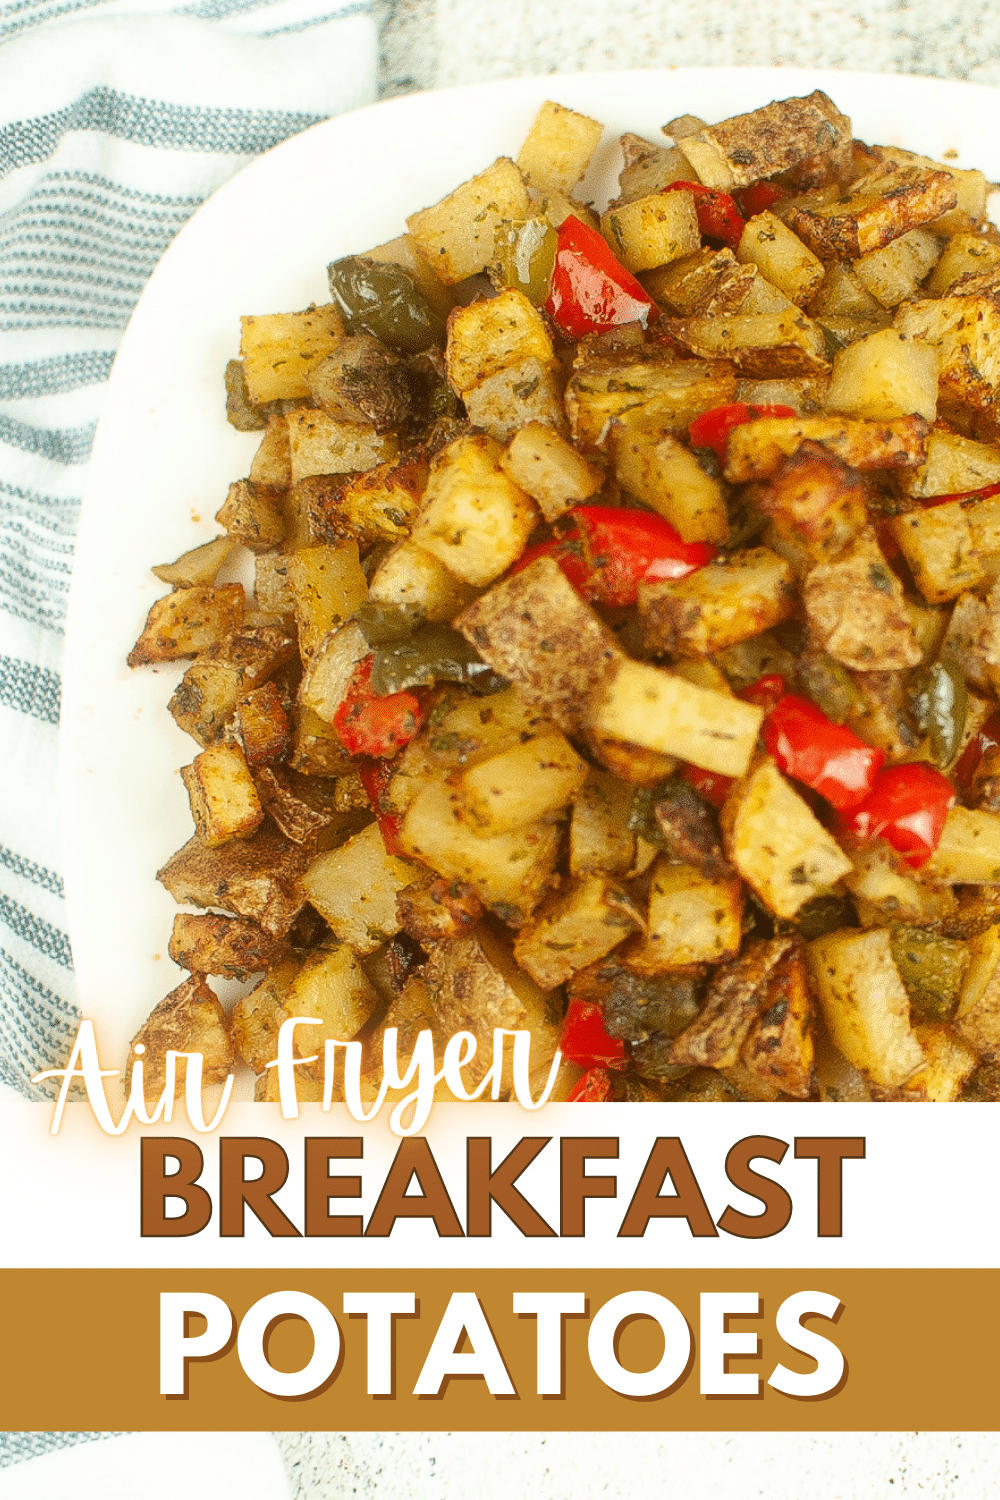 These Air Fryer Breakfast Potatoes are an easy and delicious way to enjoy breakfast potatoes without having to turn on the oven. #airfryerbreakfastpotatoes #airfryer #breakfastpotatoes #breakfast #potatoes via @wondermomwannab